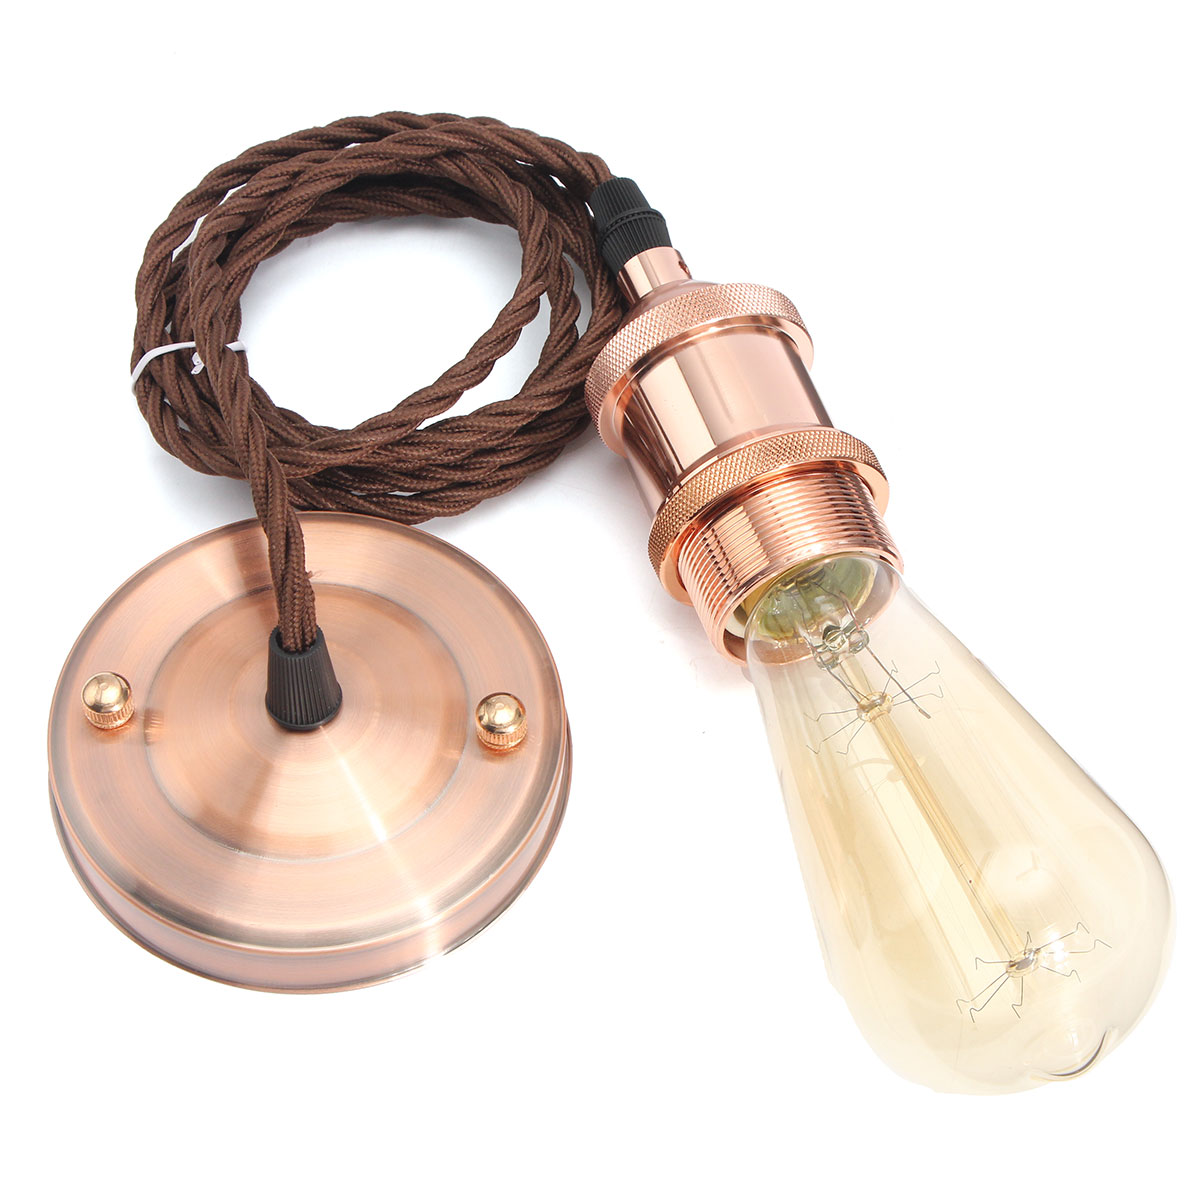 KINGSO 110V-220V 600W Vintage Lamp Holder Ceiling Canopy and Copper Socket with 2M Wire